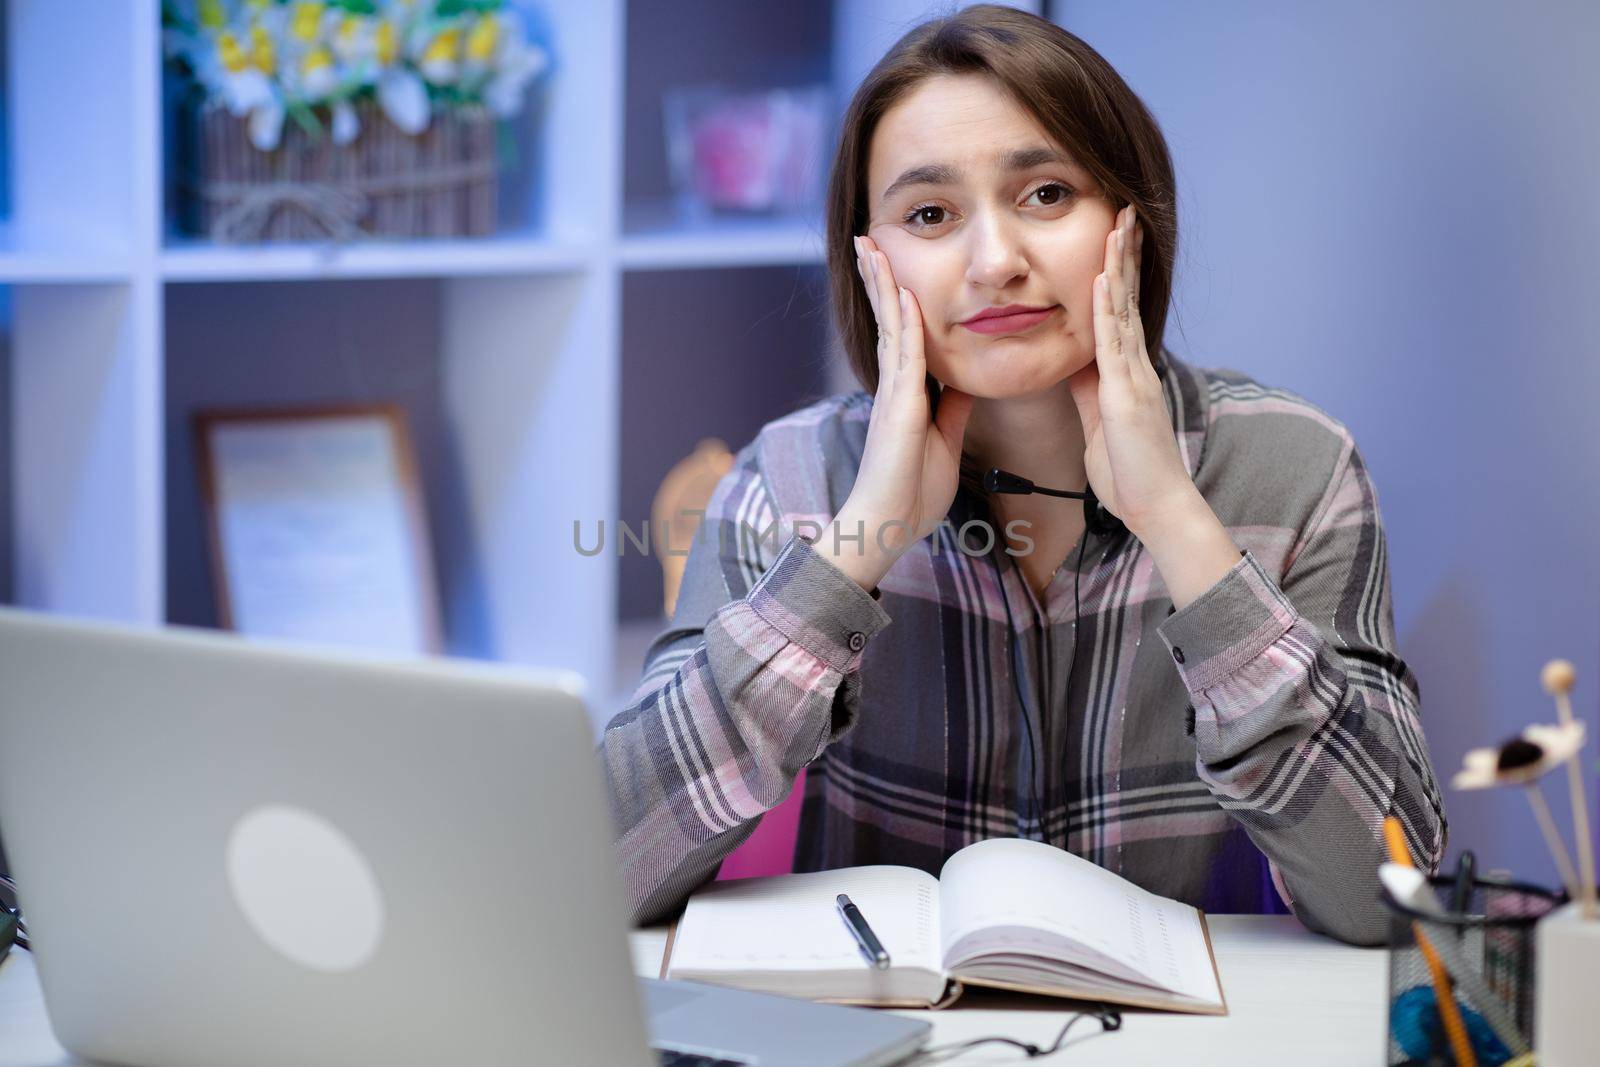 Cute girl looking and overwhelmed sitting at the desk at home doing homework. Stress emotions surprised expressive studying learning home by uflypro